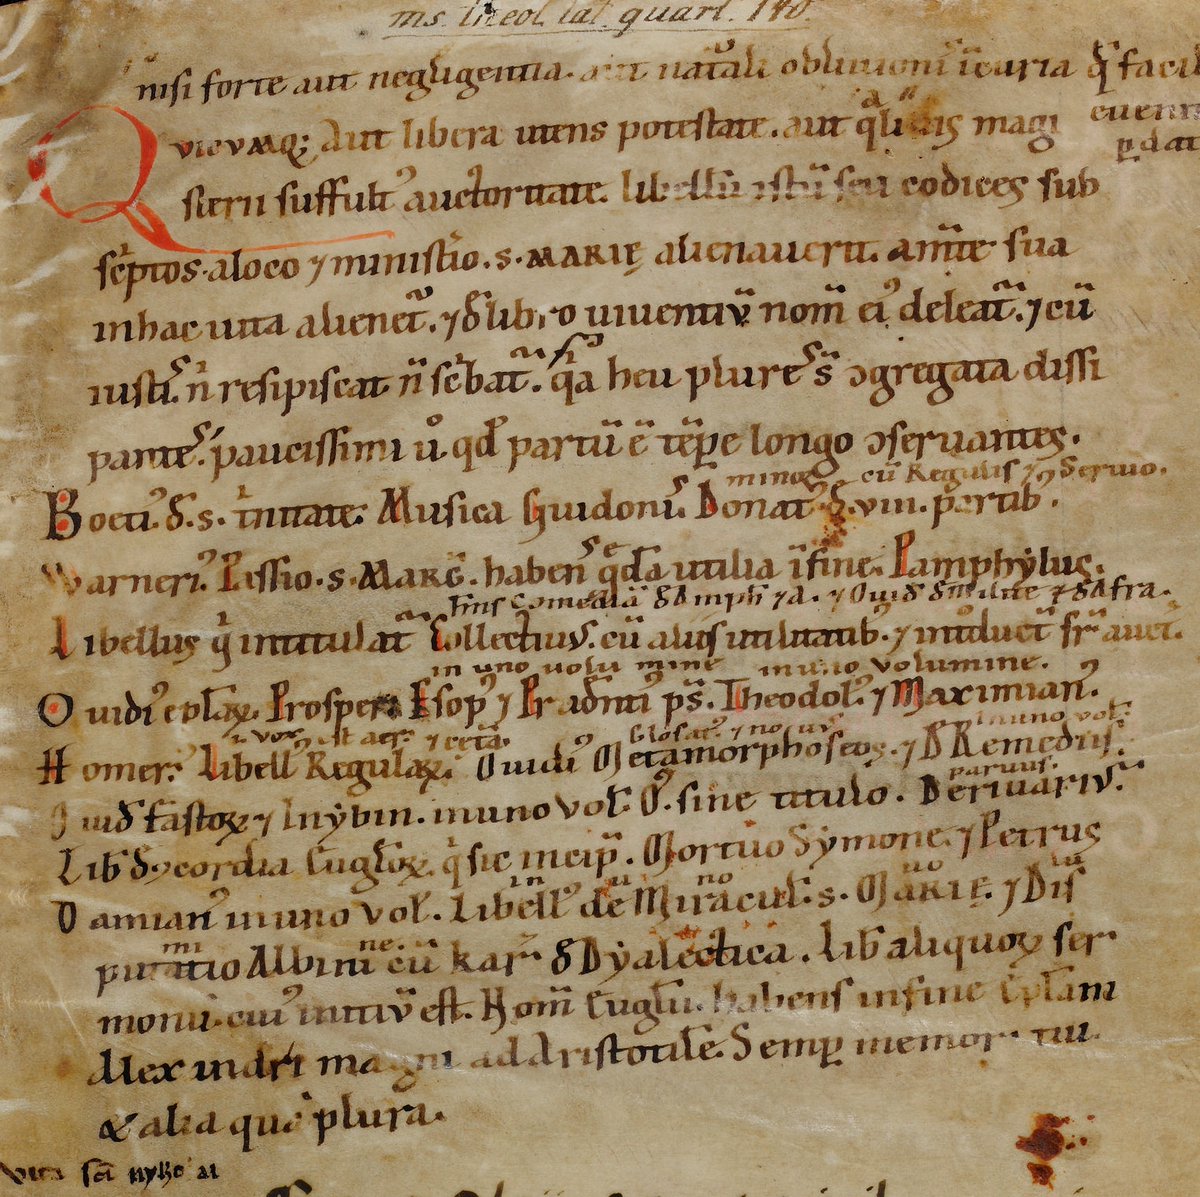 But wait, there's more! On f. 1 we find a list of books held by the Lambach Abbey in the late 12th c., as recorded by Gottschalk himself! A treasure trove of information. What were the monks reading? Boethius! Homer! Pamphylus! Aesop! Ovid! No wonder Gottschalk was such a poet.